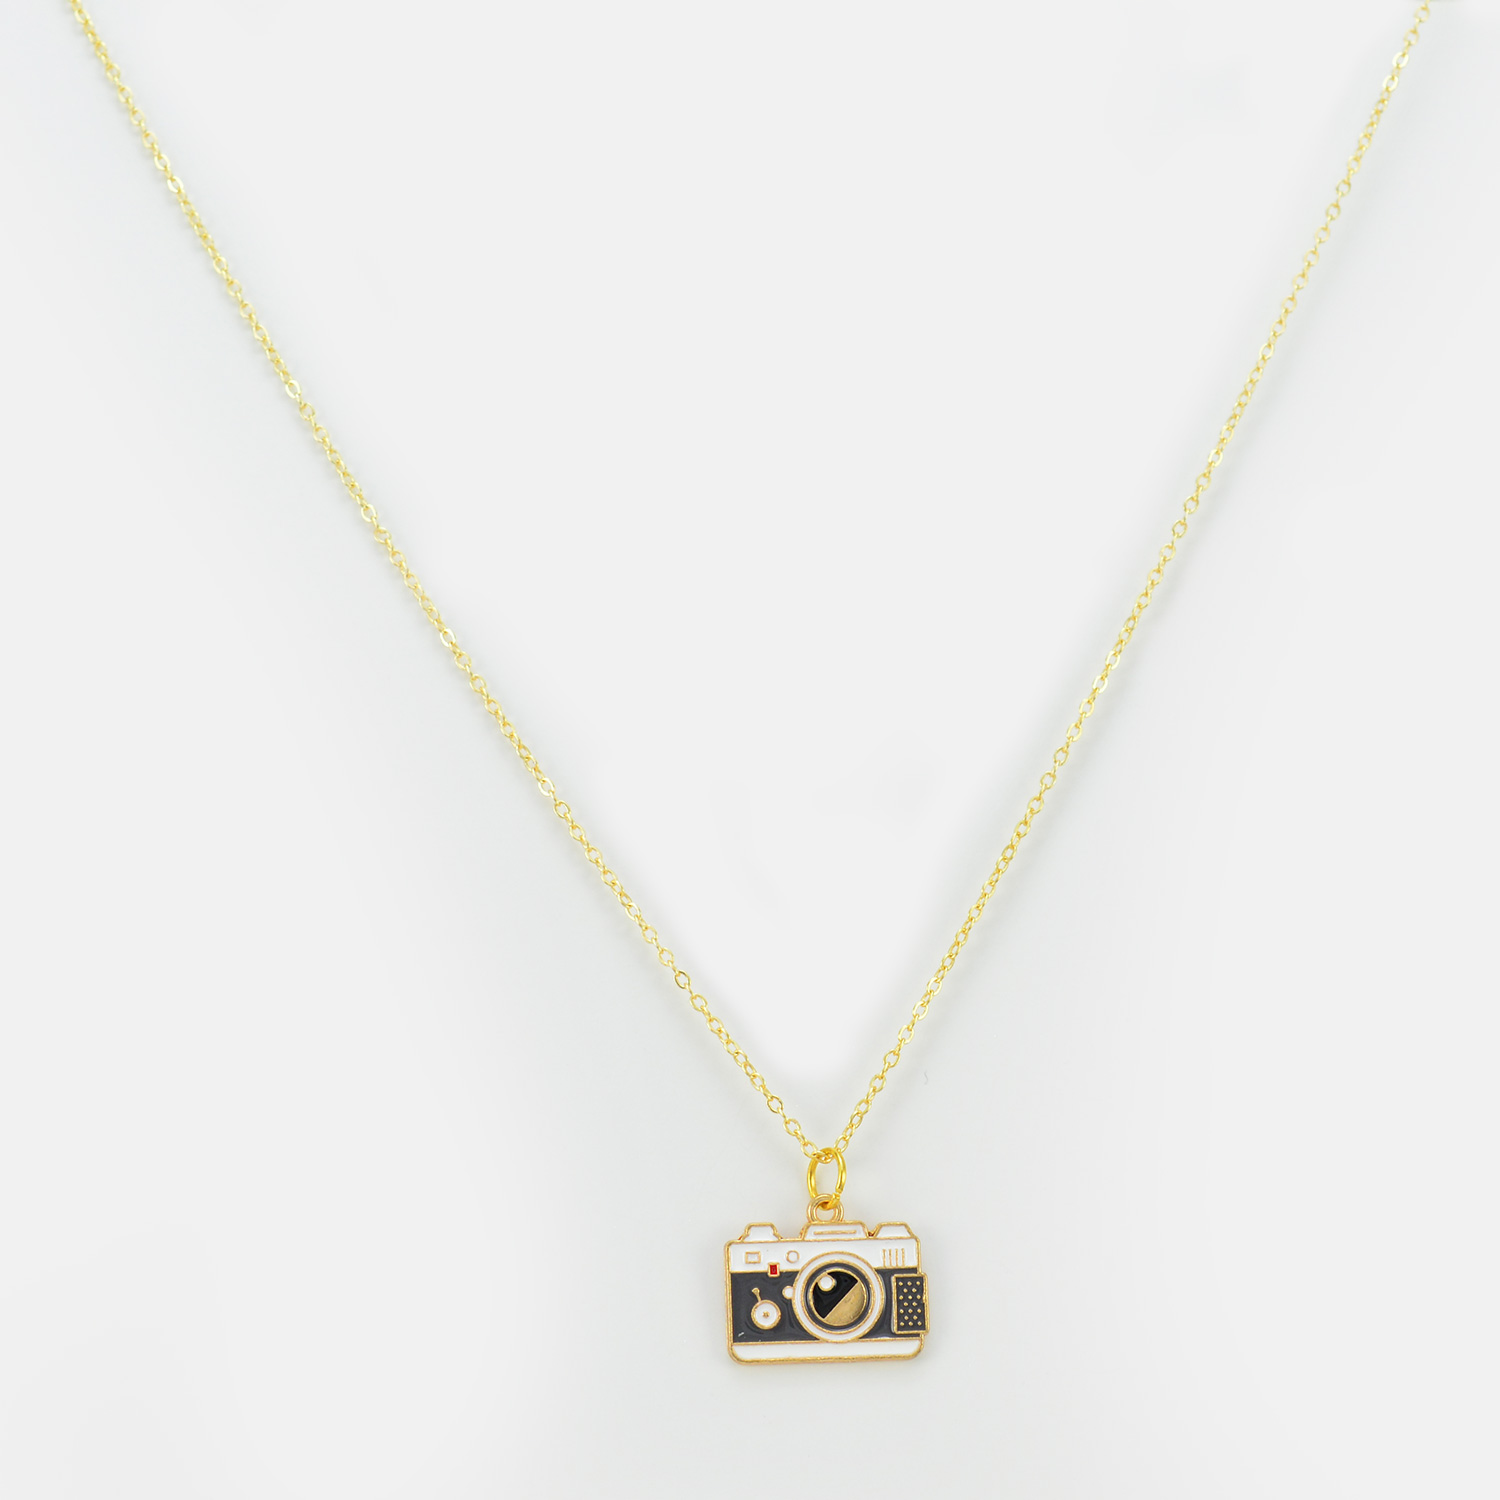 Golden Color Chain With Camera Design 